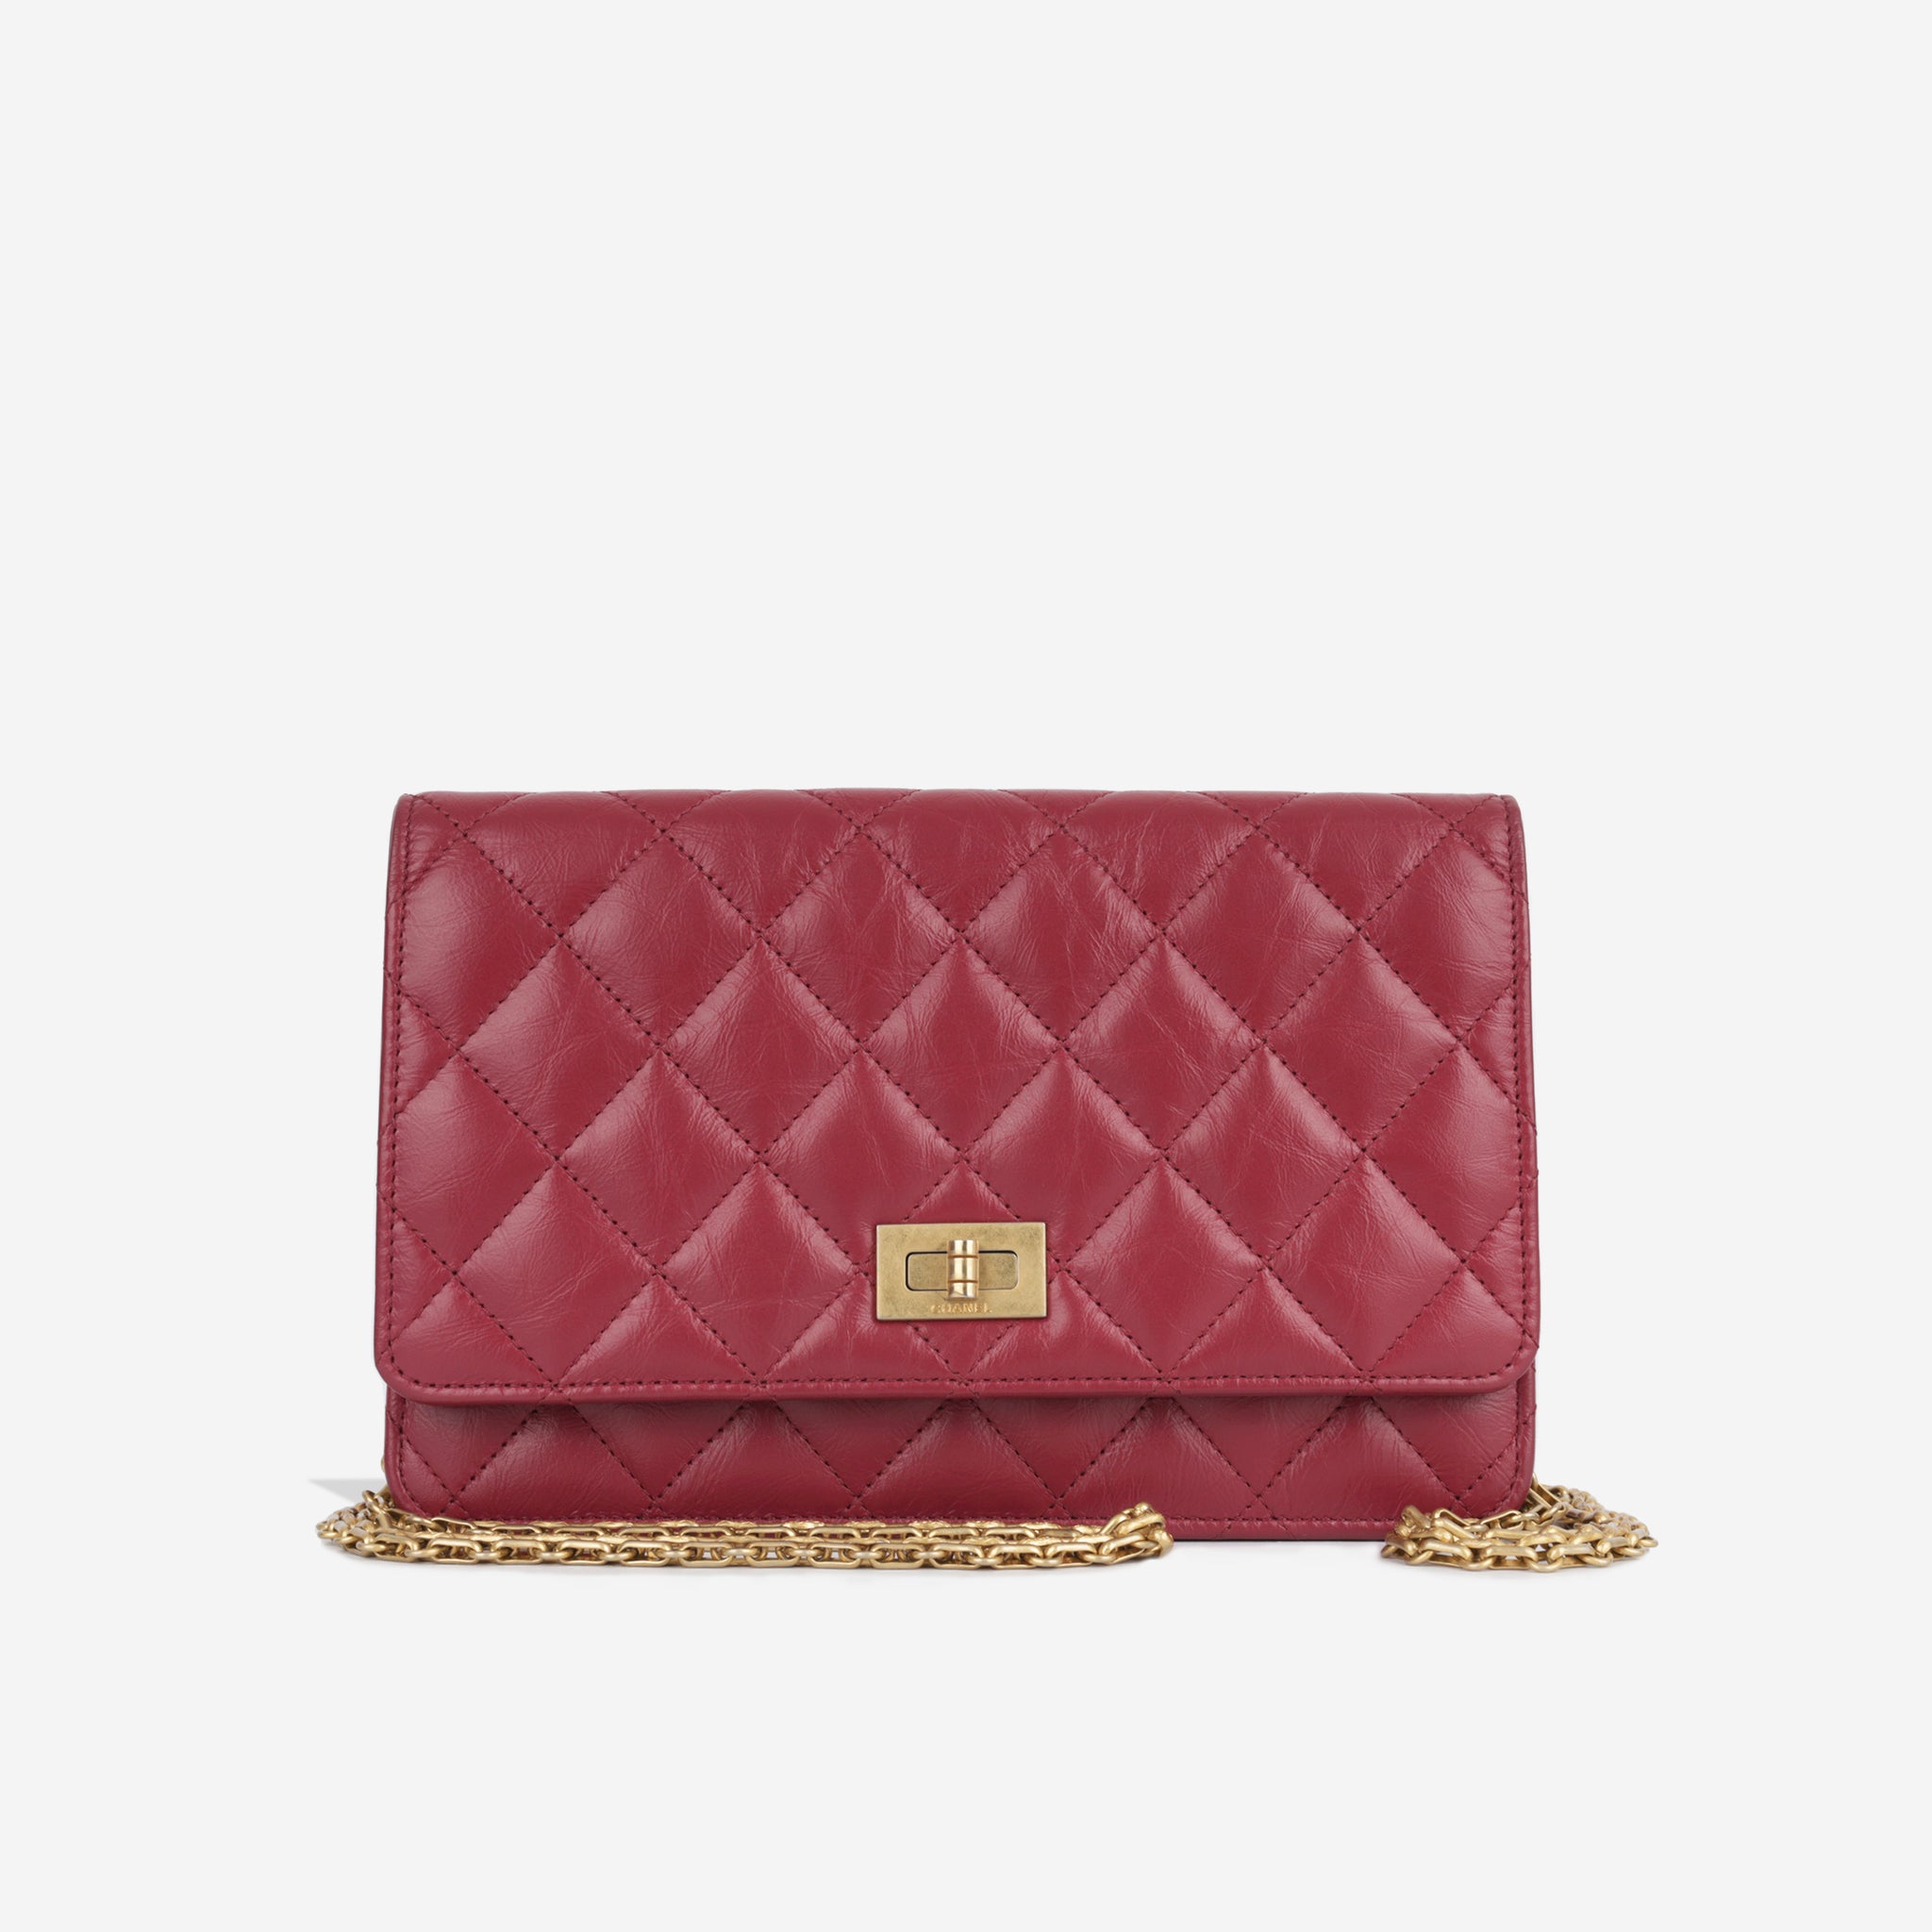 Chanel - Re-issue Wallet on Chain - Red Aged Calfskin GHW - 2019